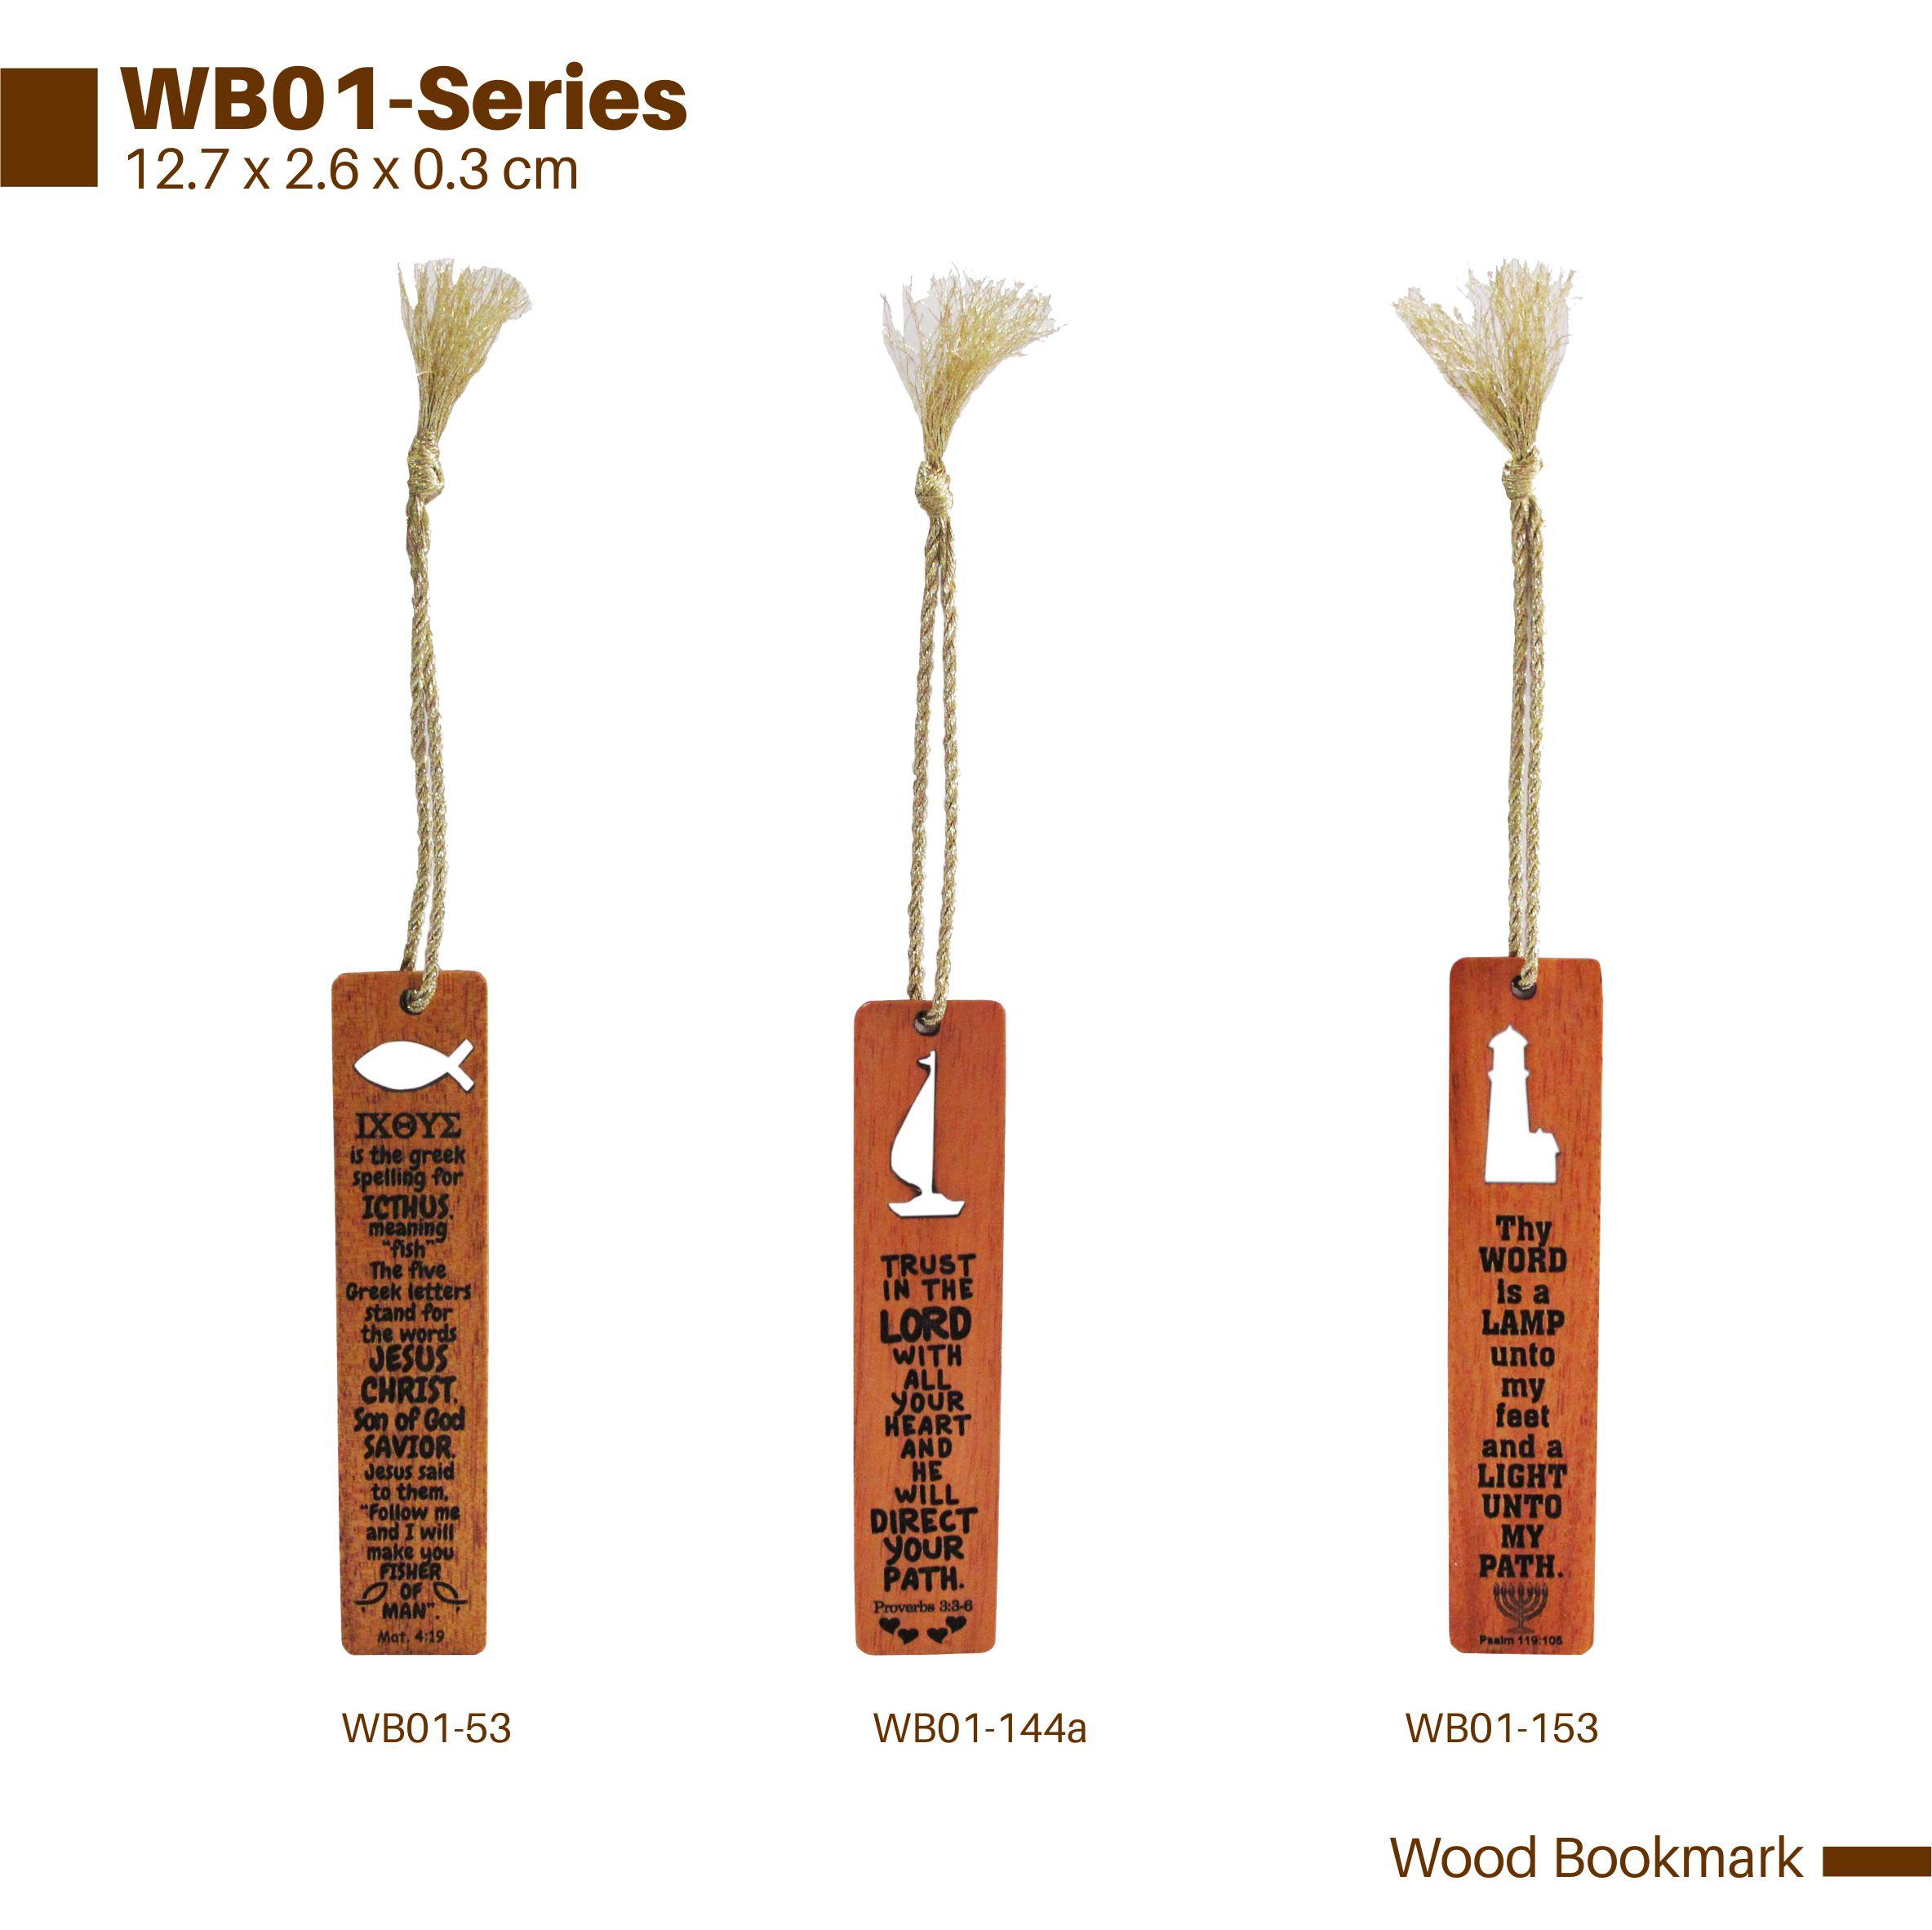 WOODEN BOOKMARK (WB01 SERIES)